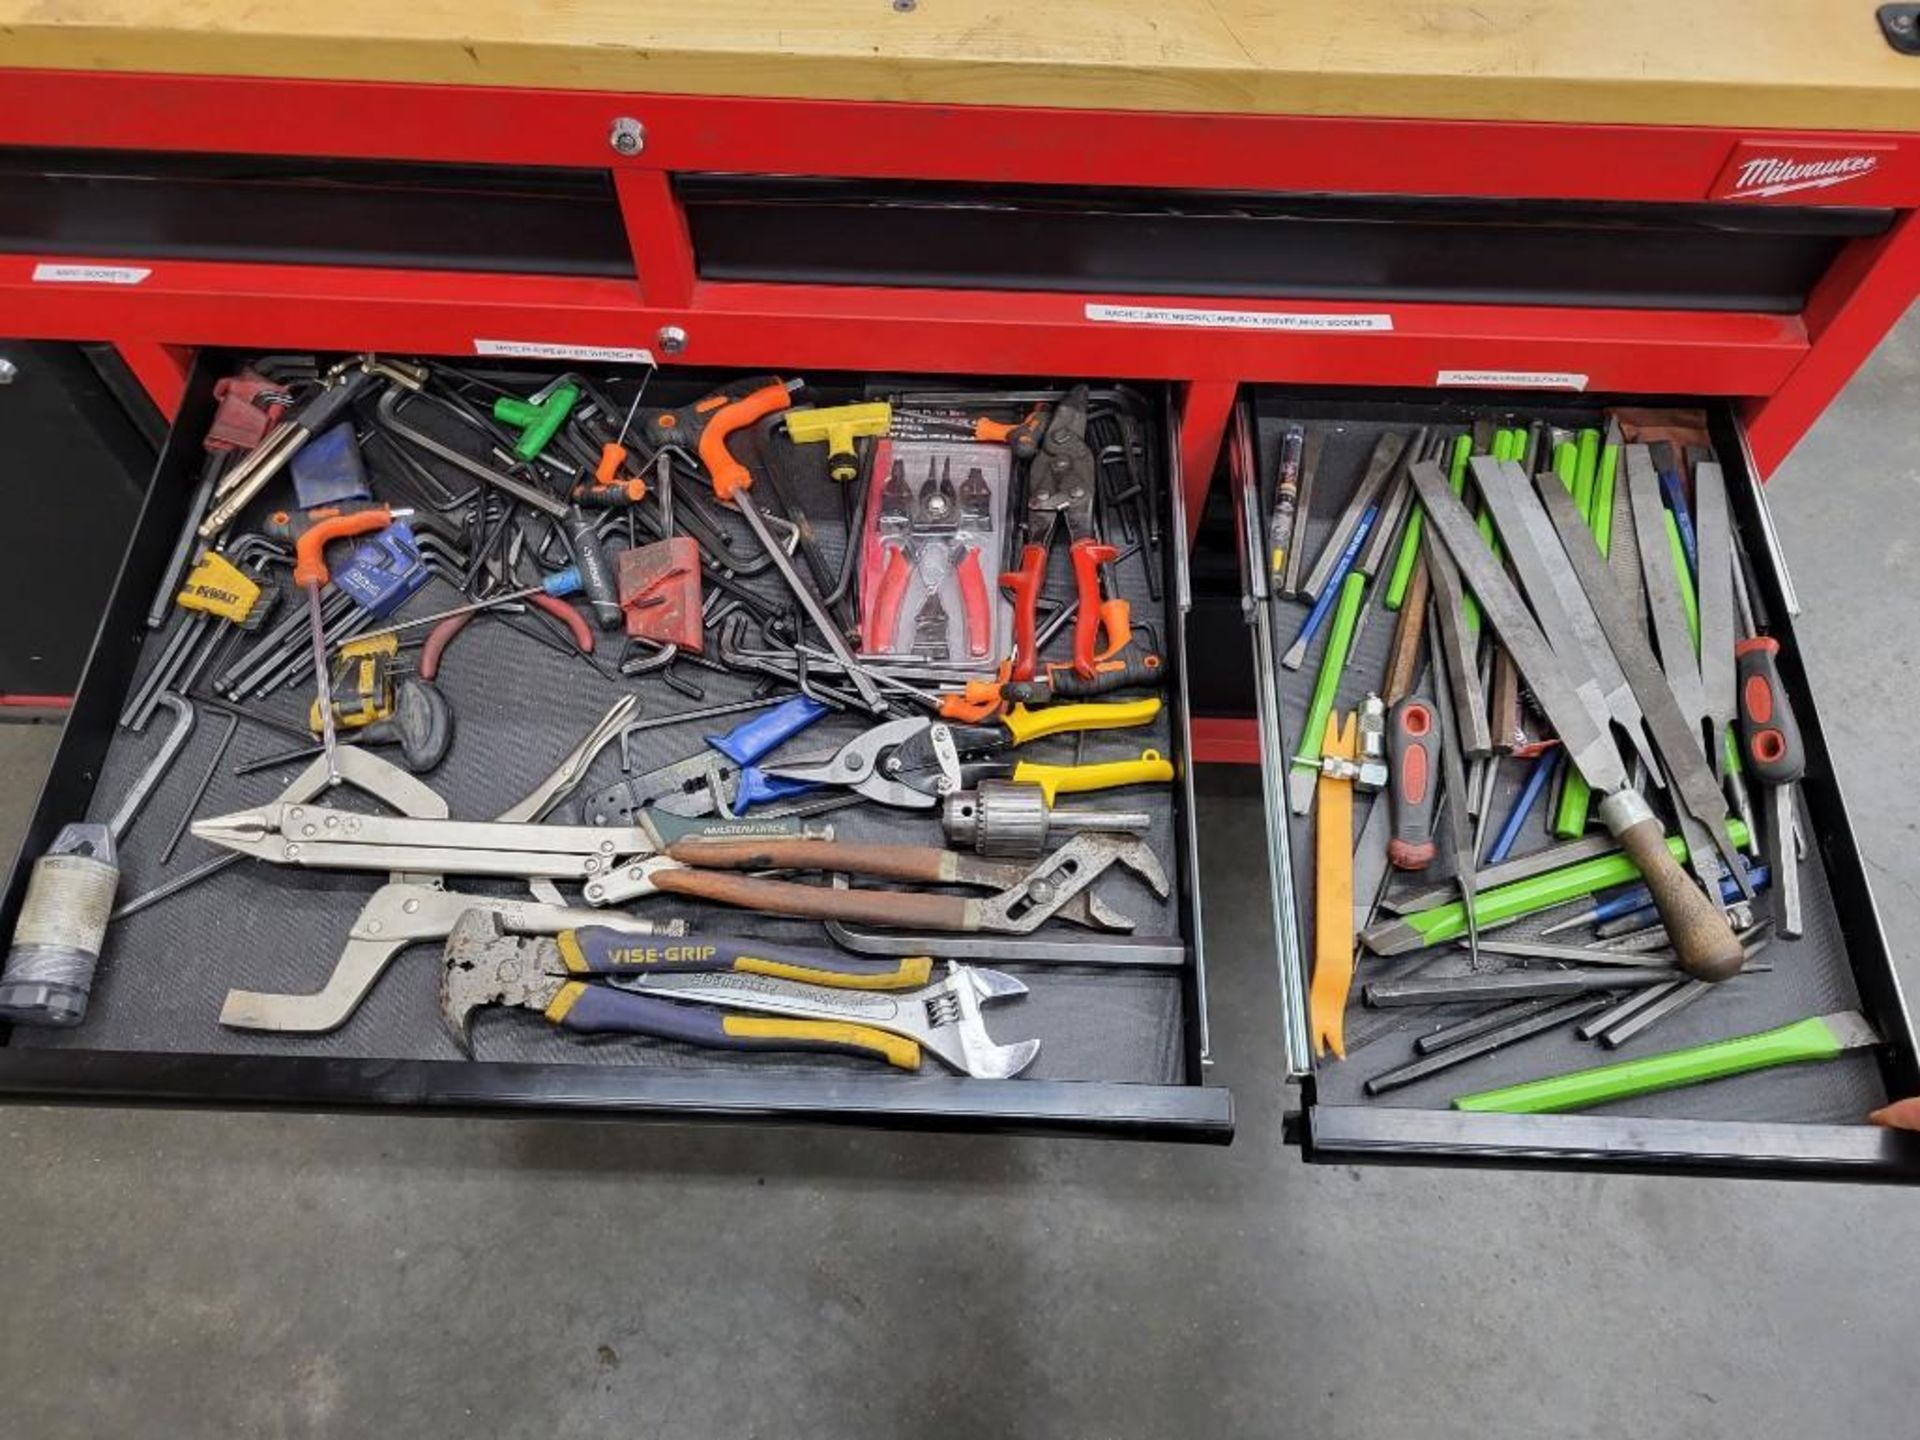 MILWAUKEE 60" MOBILE WORKBENCH LOADED WITH TOOLS - Image 11 of 18